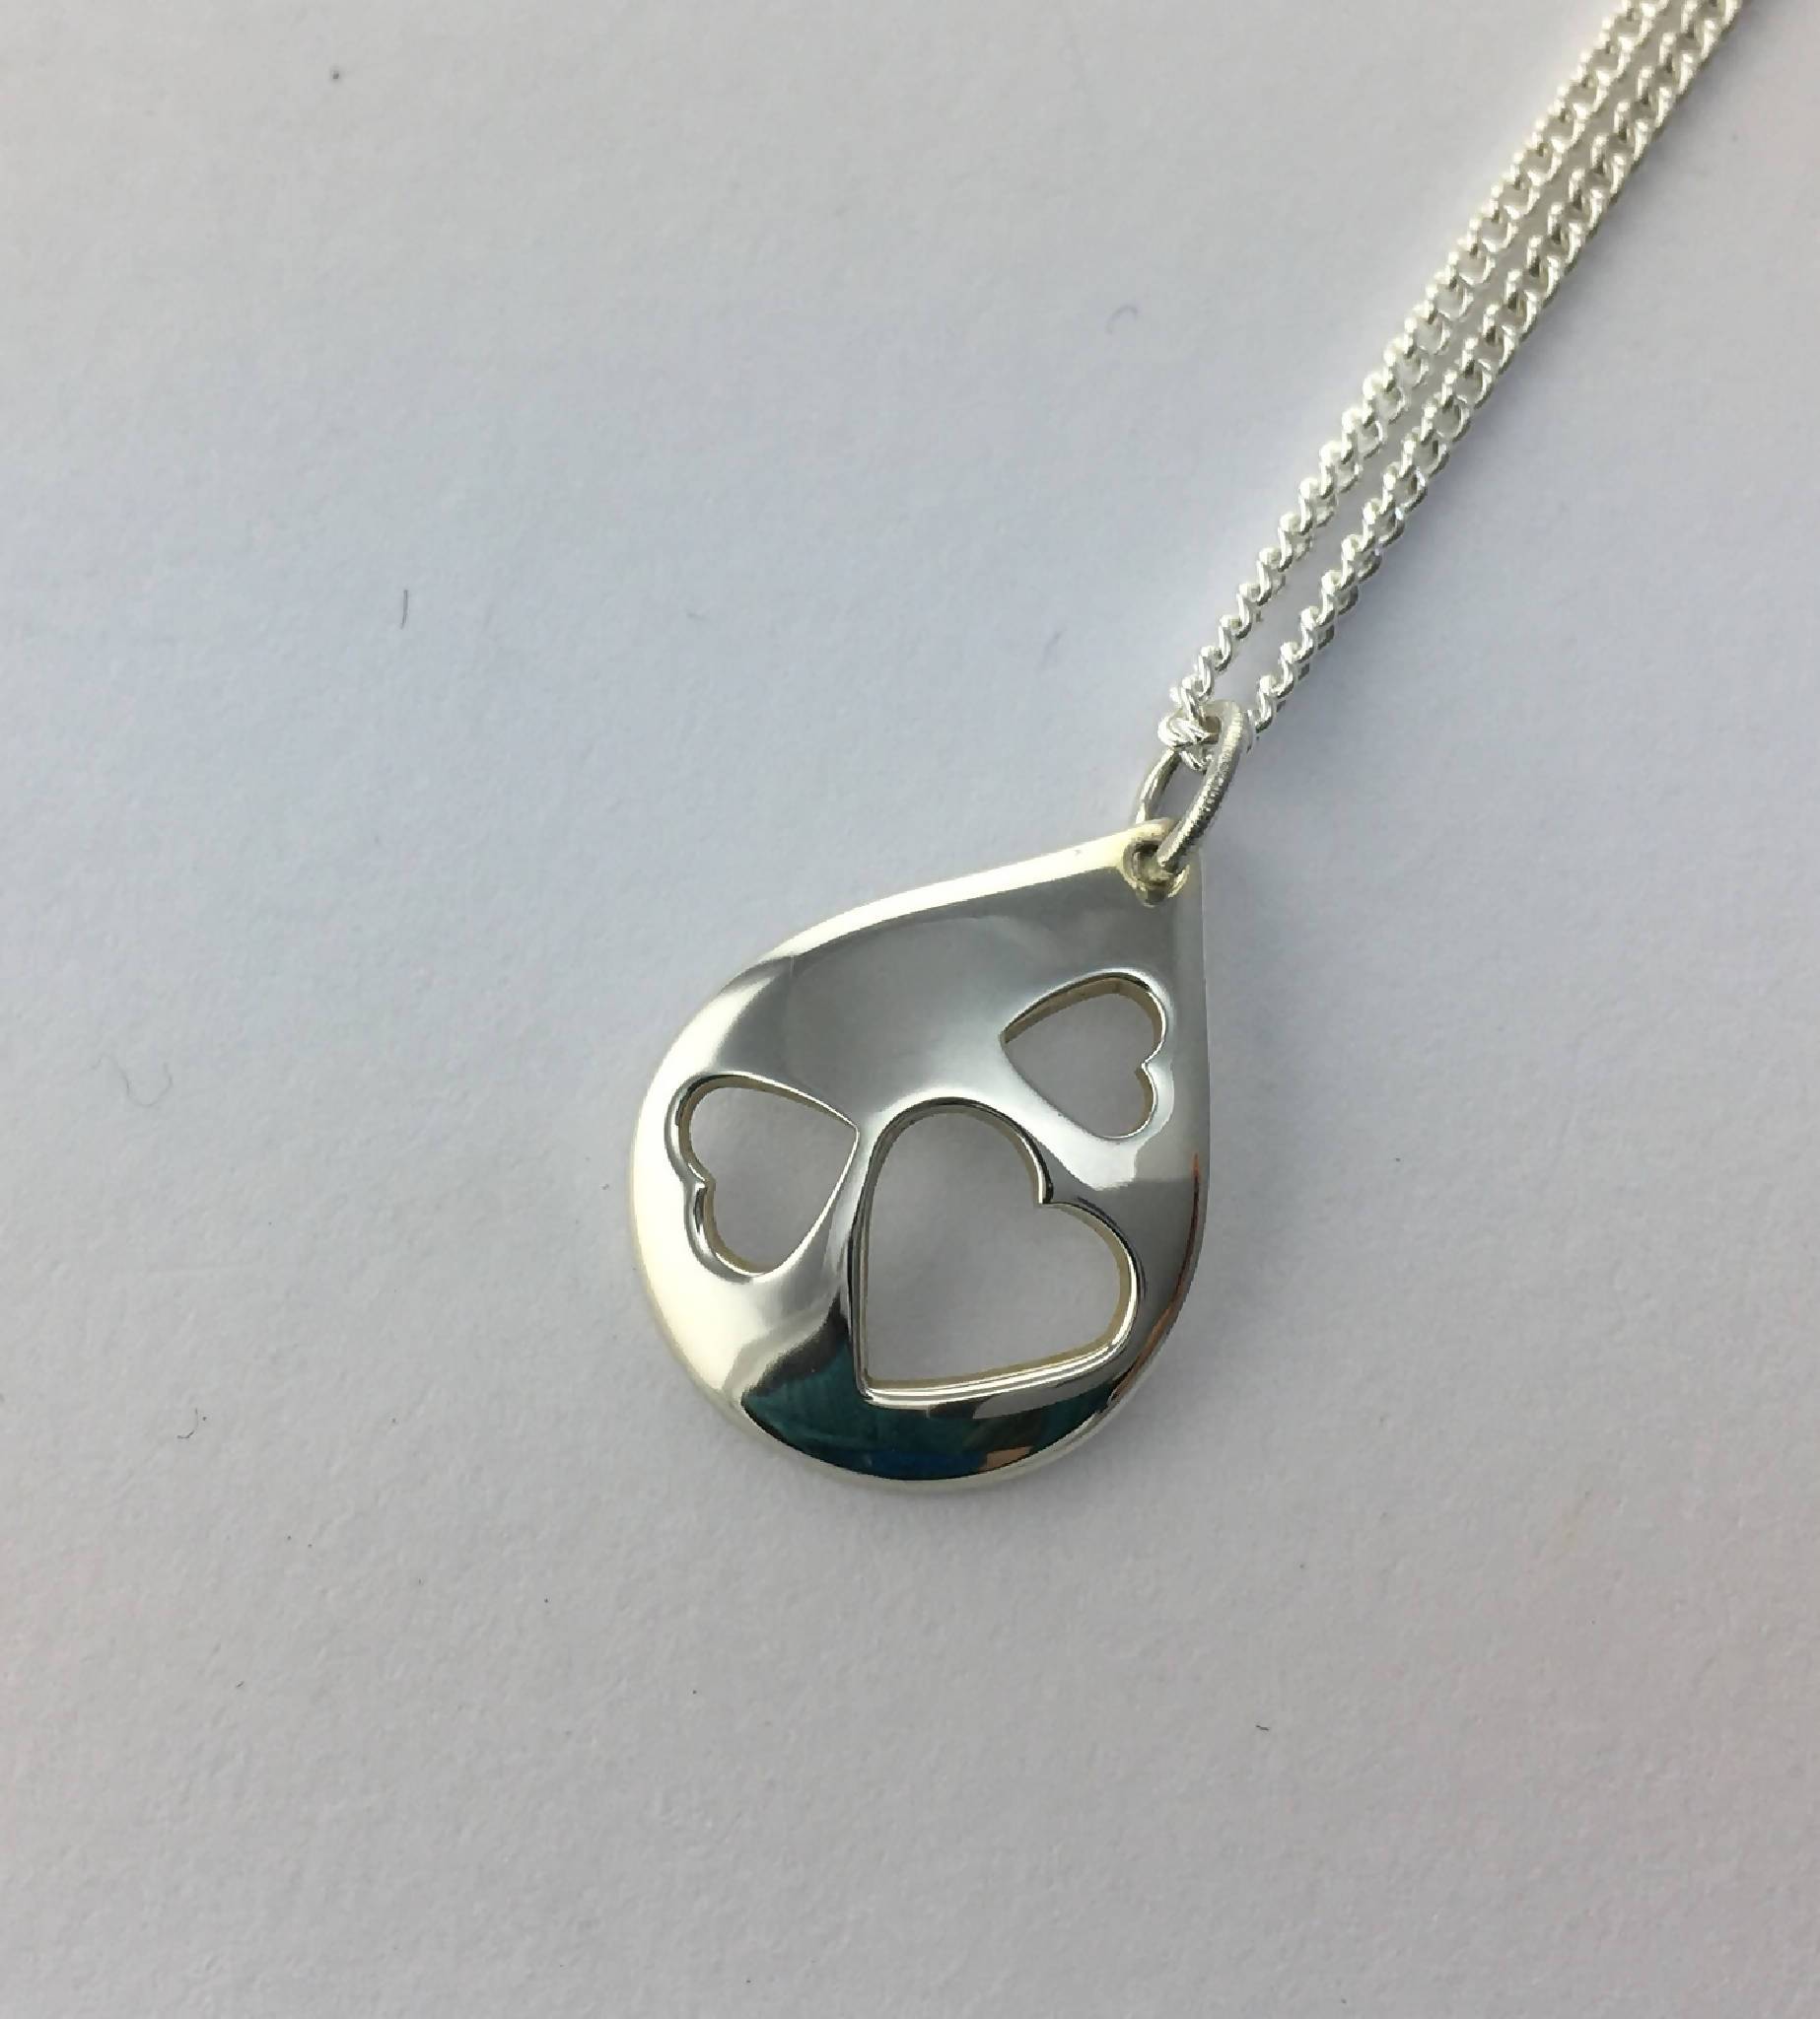 Small teardrop filled with three hearts pendant